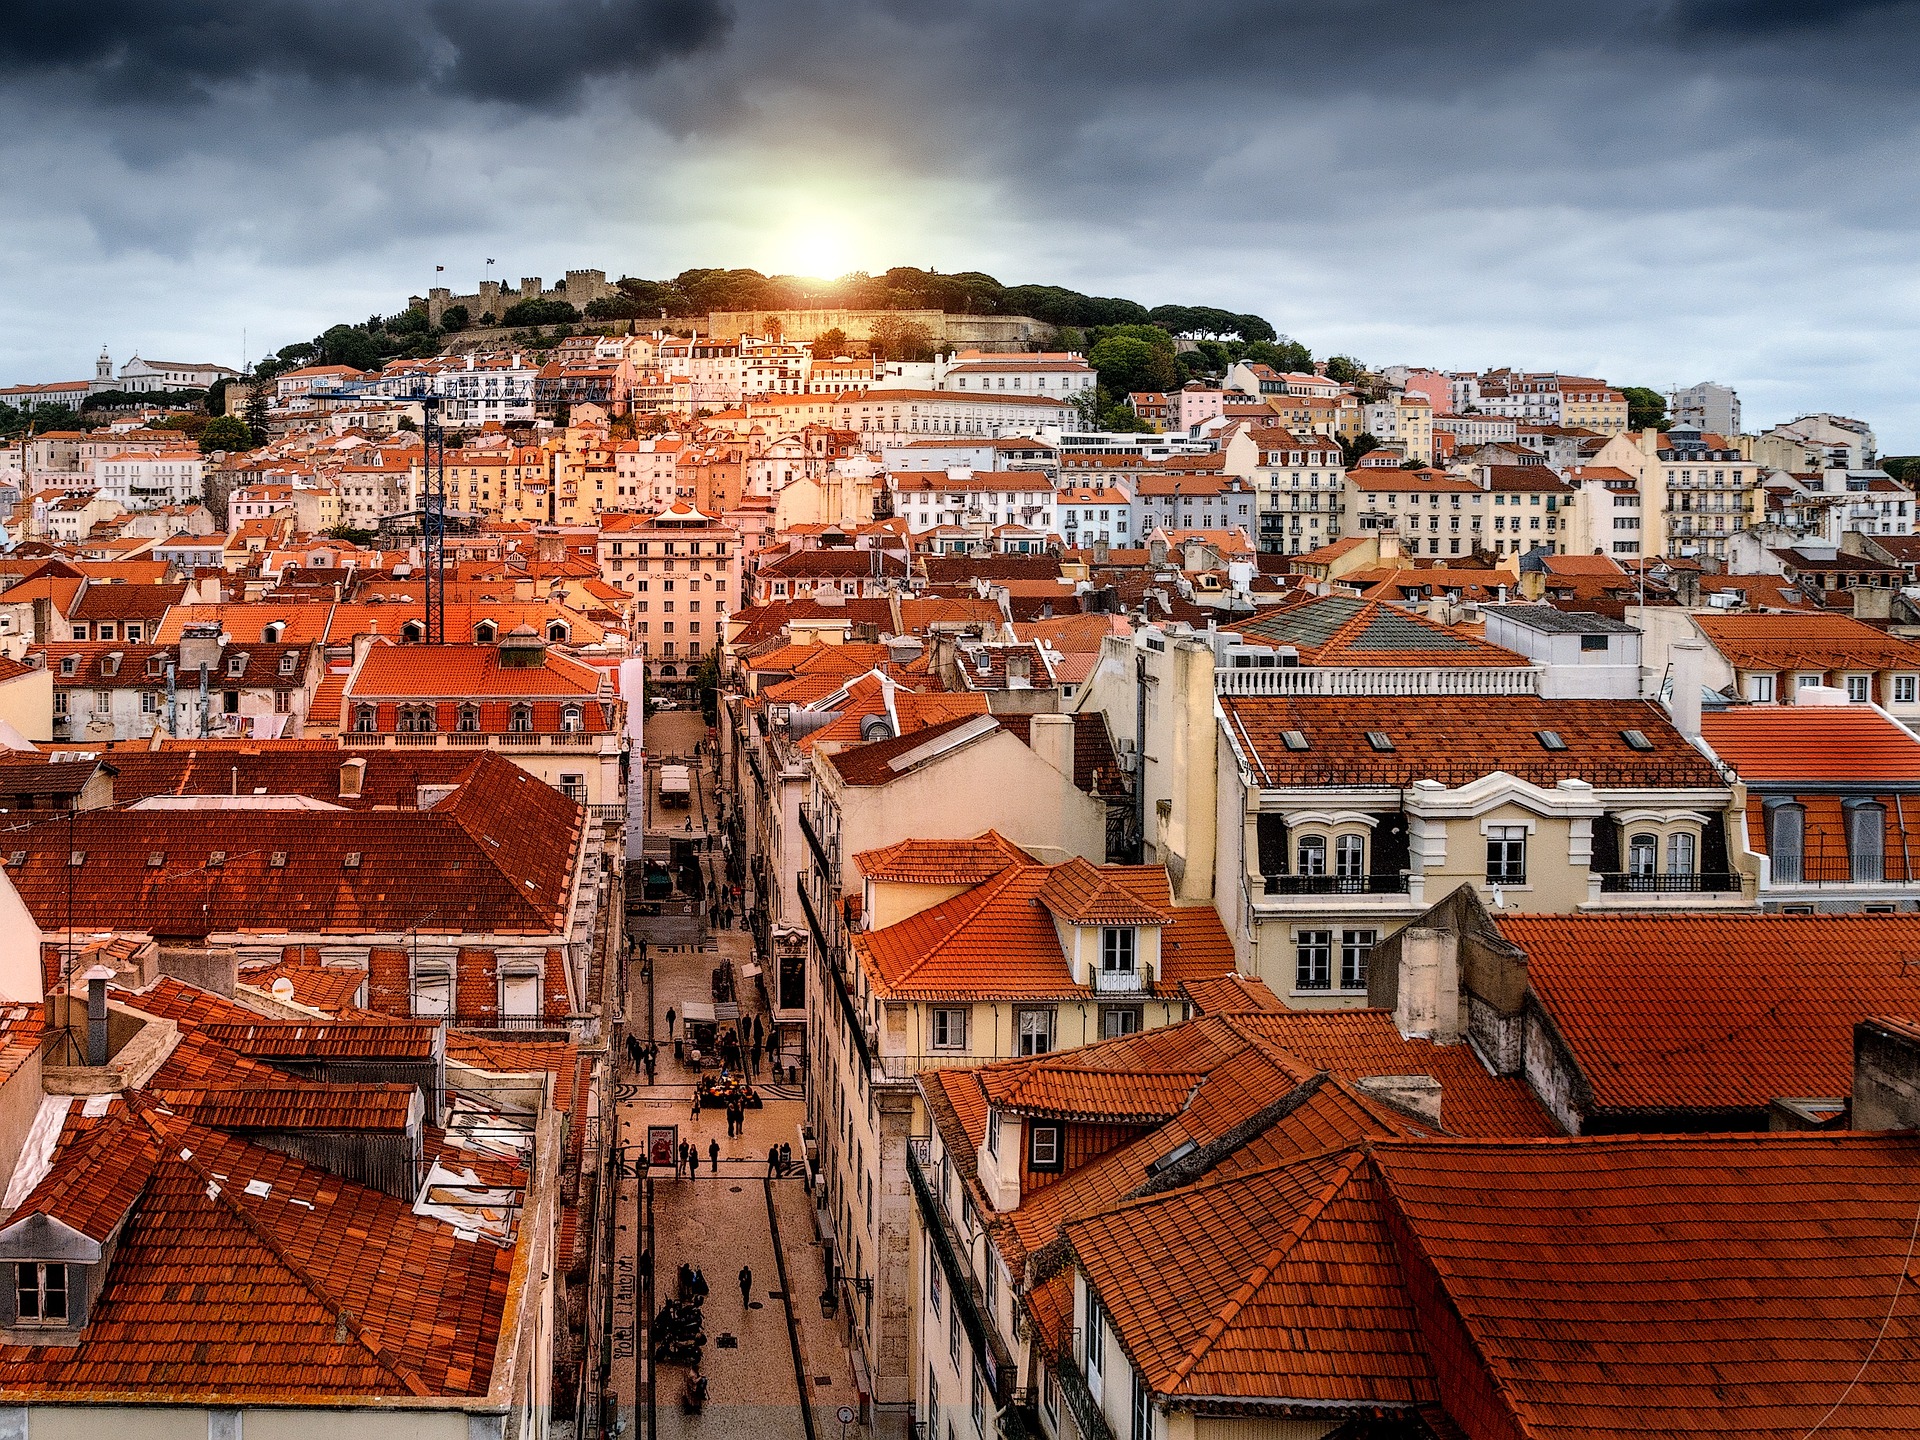 Porto and Lisbon are the most popular cities, however, Braga, Aveiro, Bragança, Vila Real and Santarém are famous cities as well